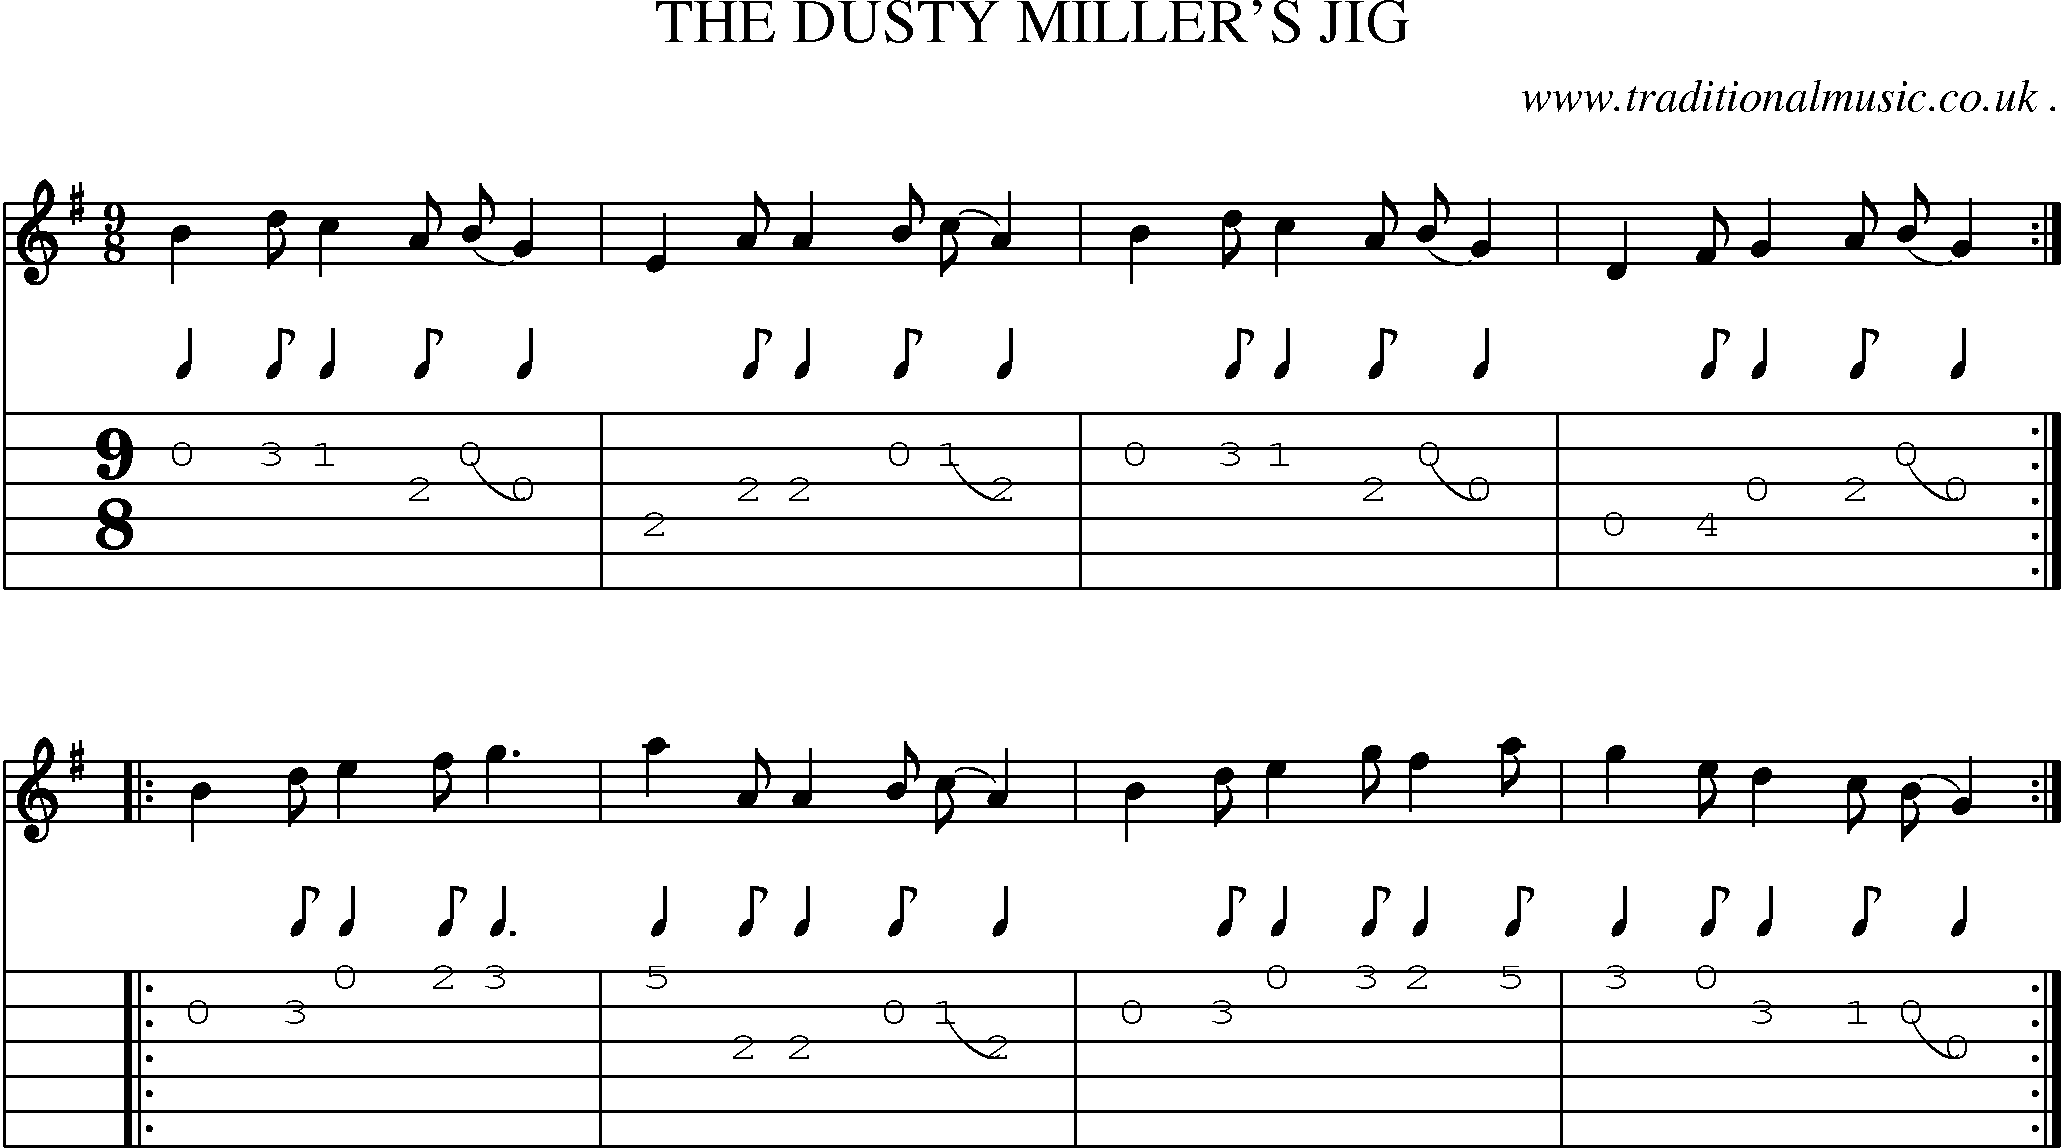 Sheet-Music and Guitar Tabs for The Dusty Millers Jig